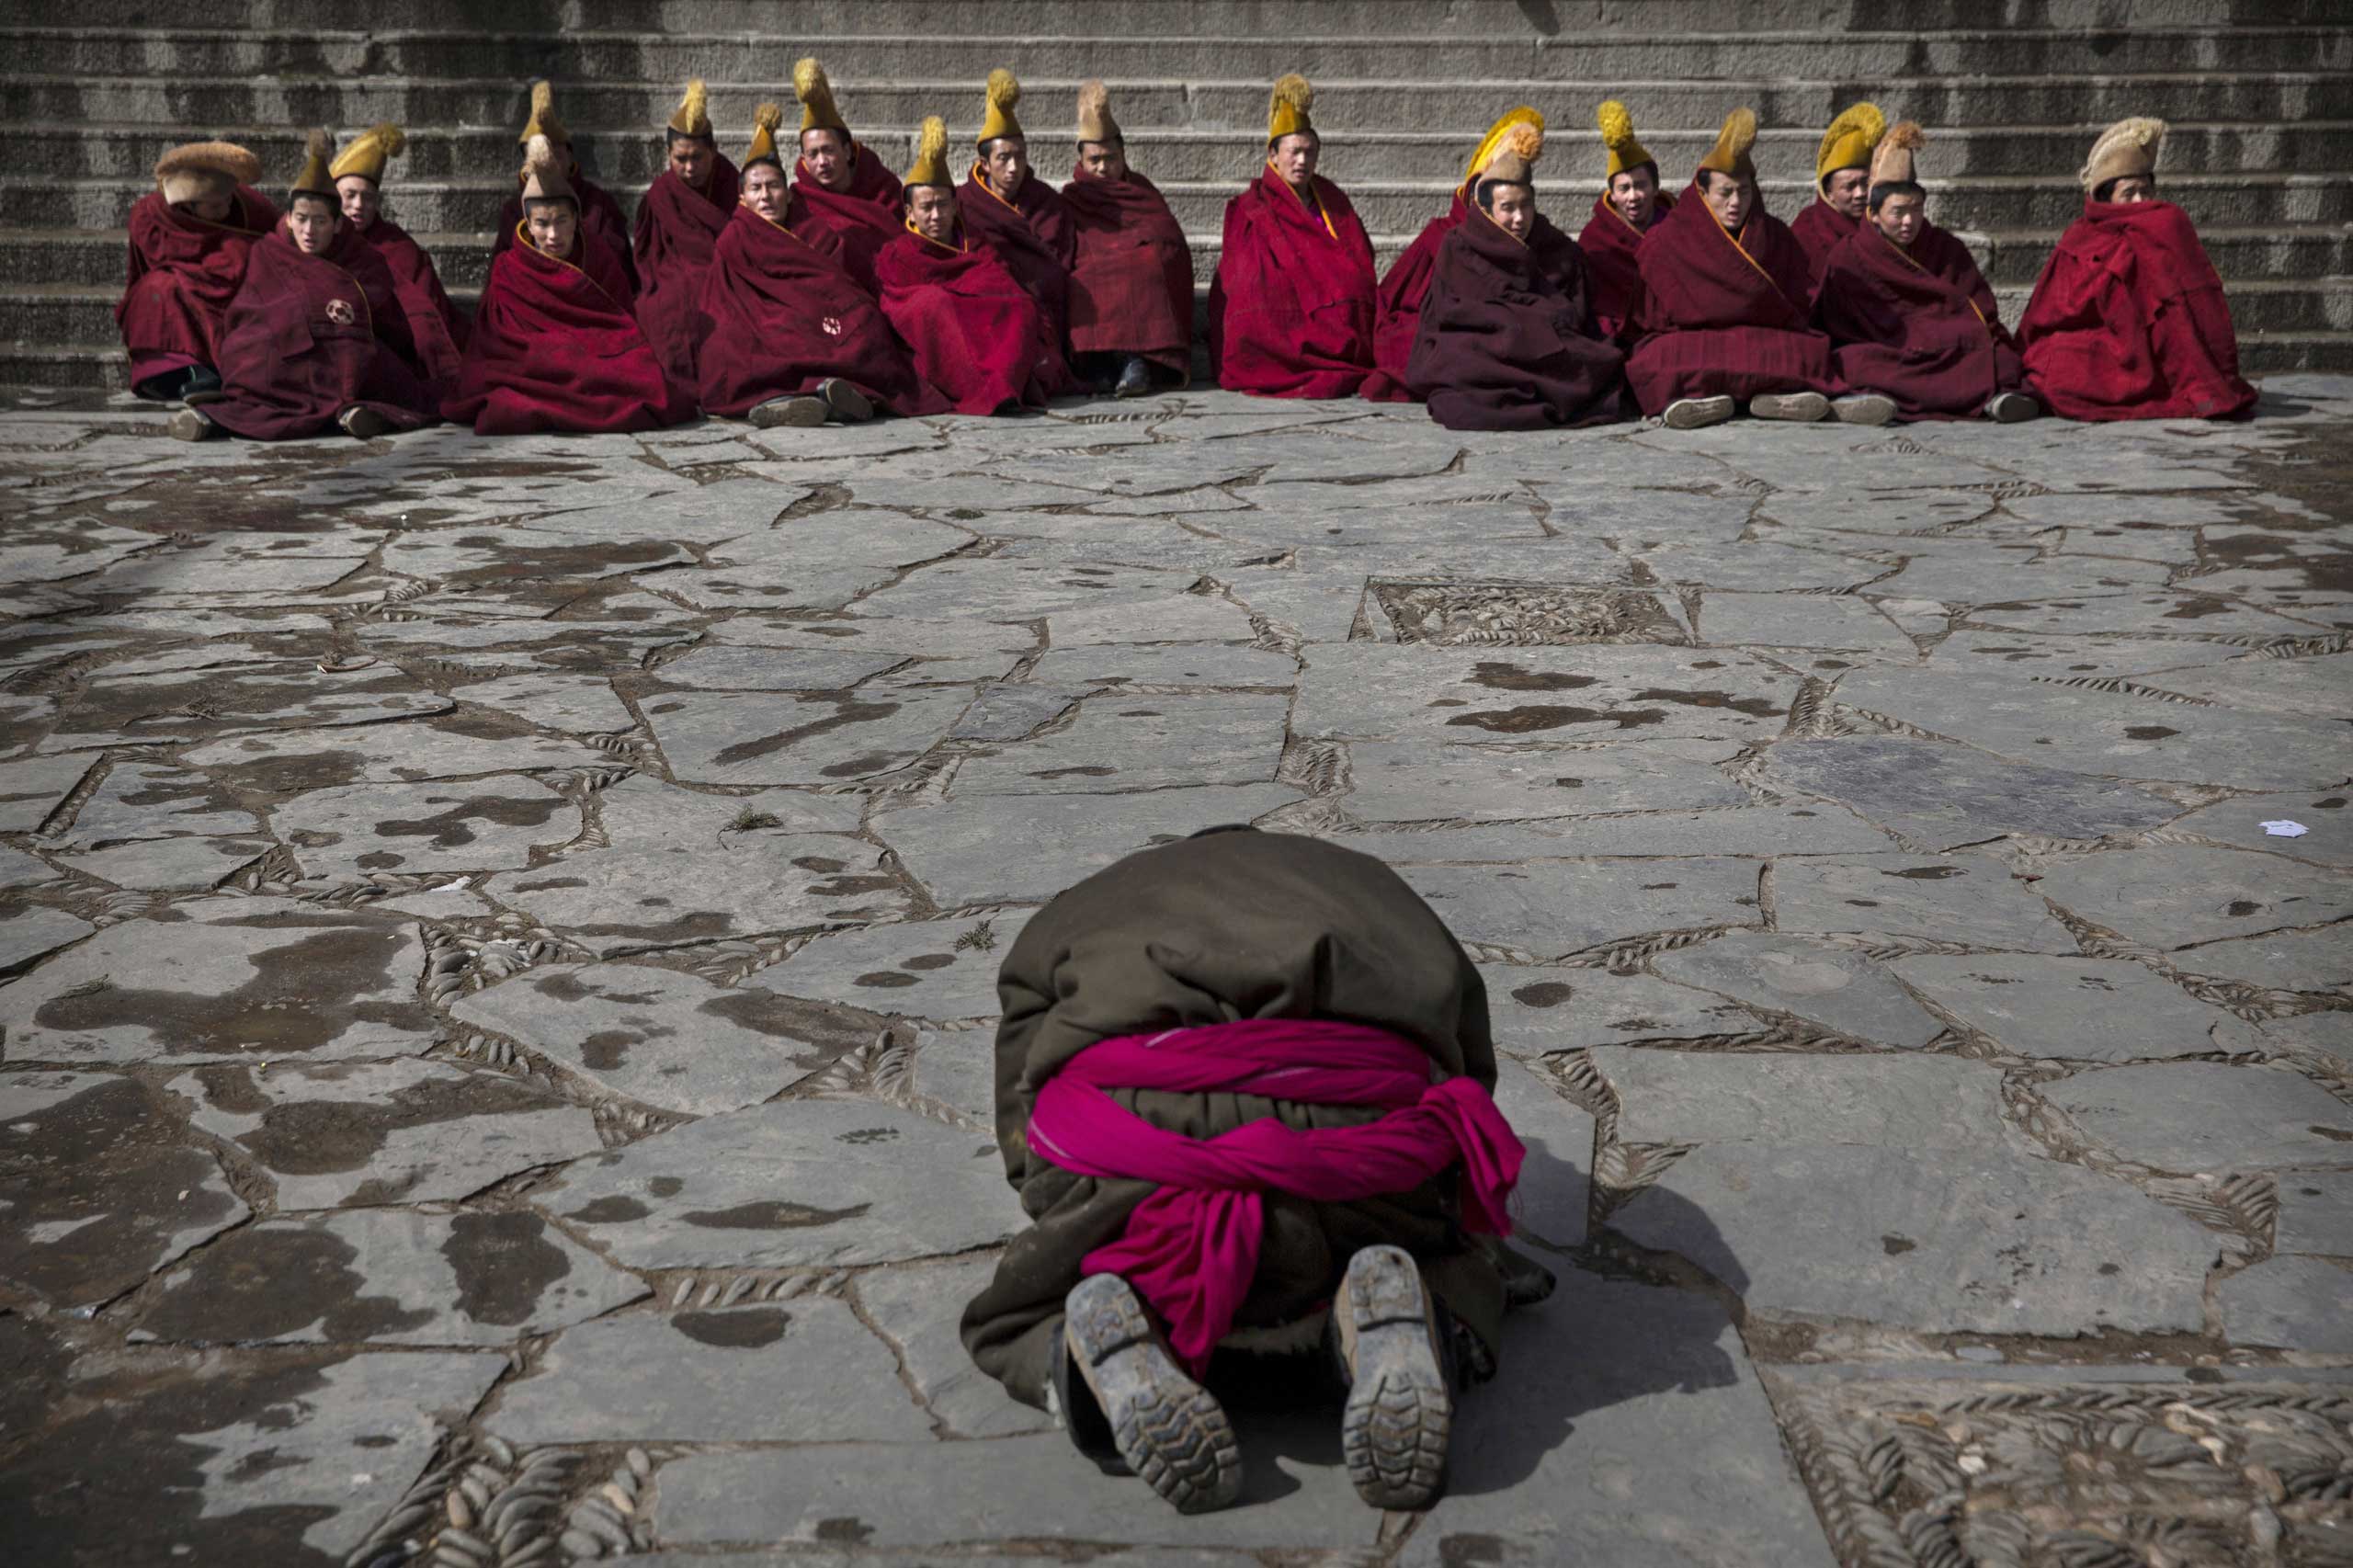 A worshipper prays in front of Tibetan Buddhist monks during Monlam or the Great Prayer rituals on March 5, 2015 at the Labrang Monastery.